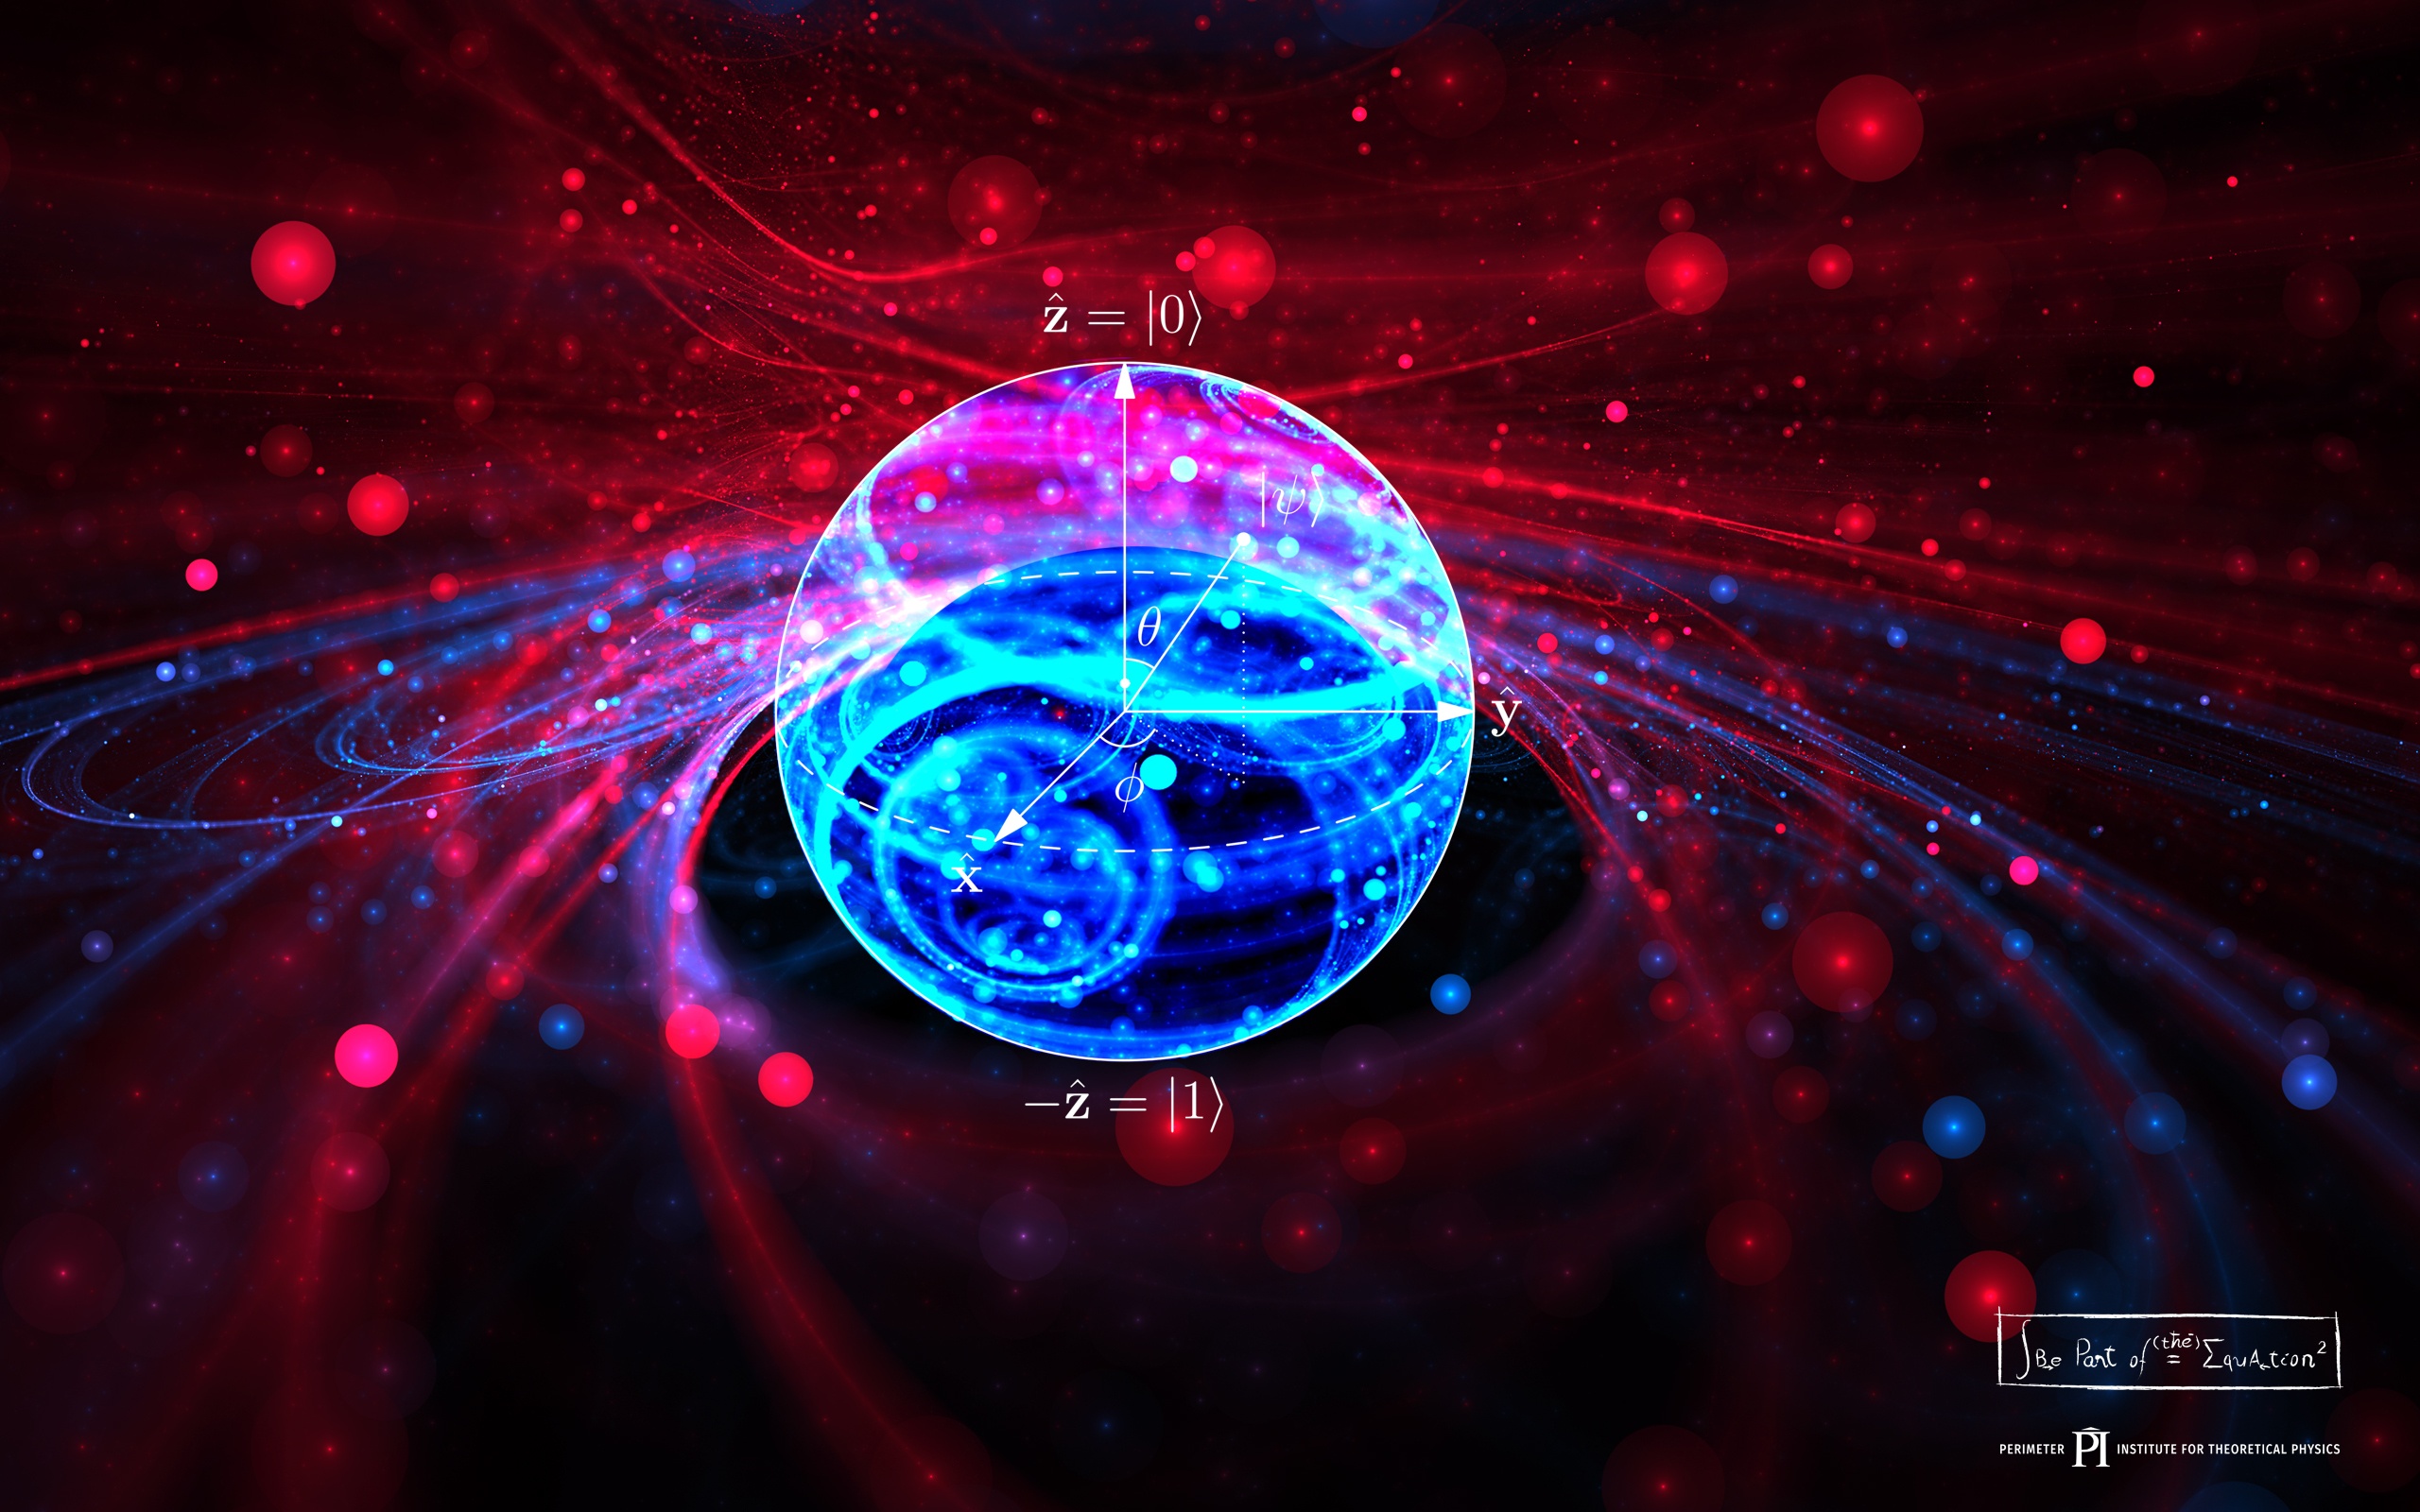 8 inspiring (and free!) scientific wallpapers to smarten up any device